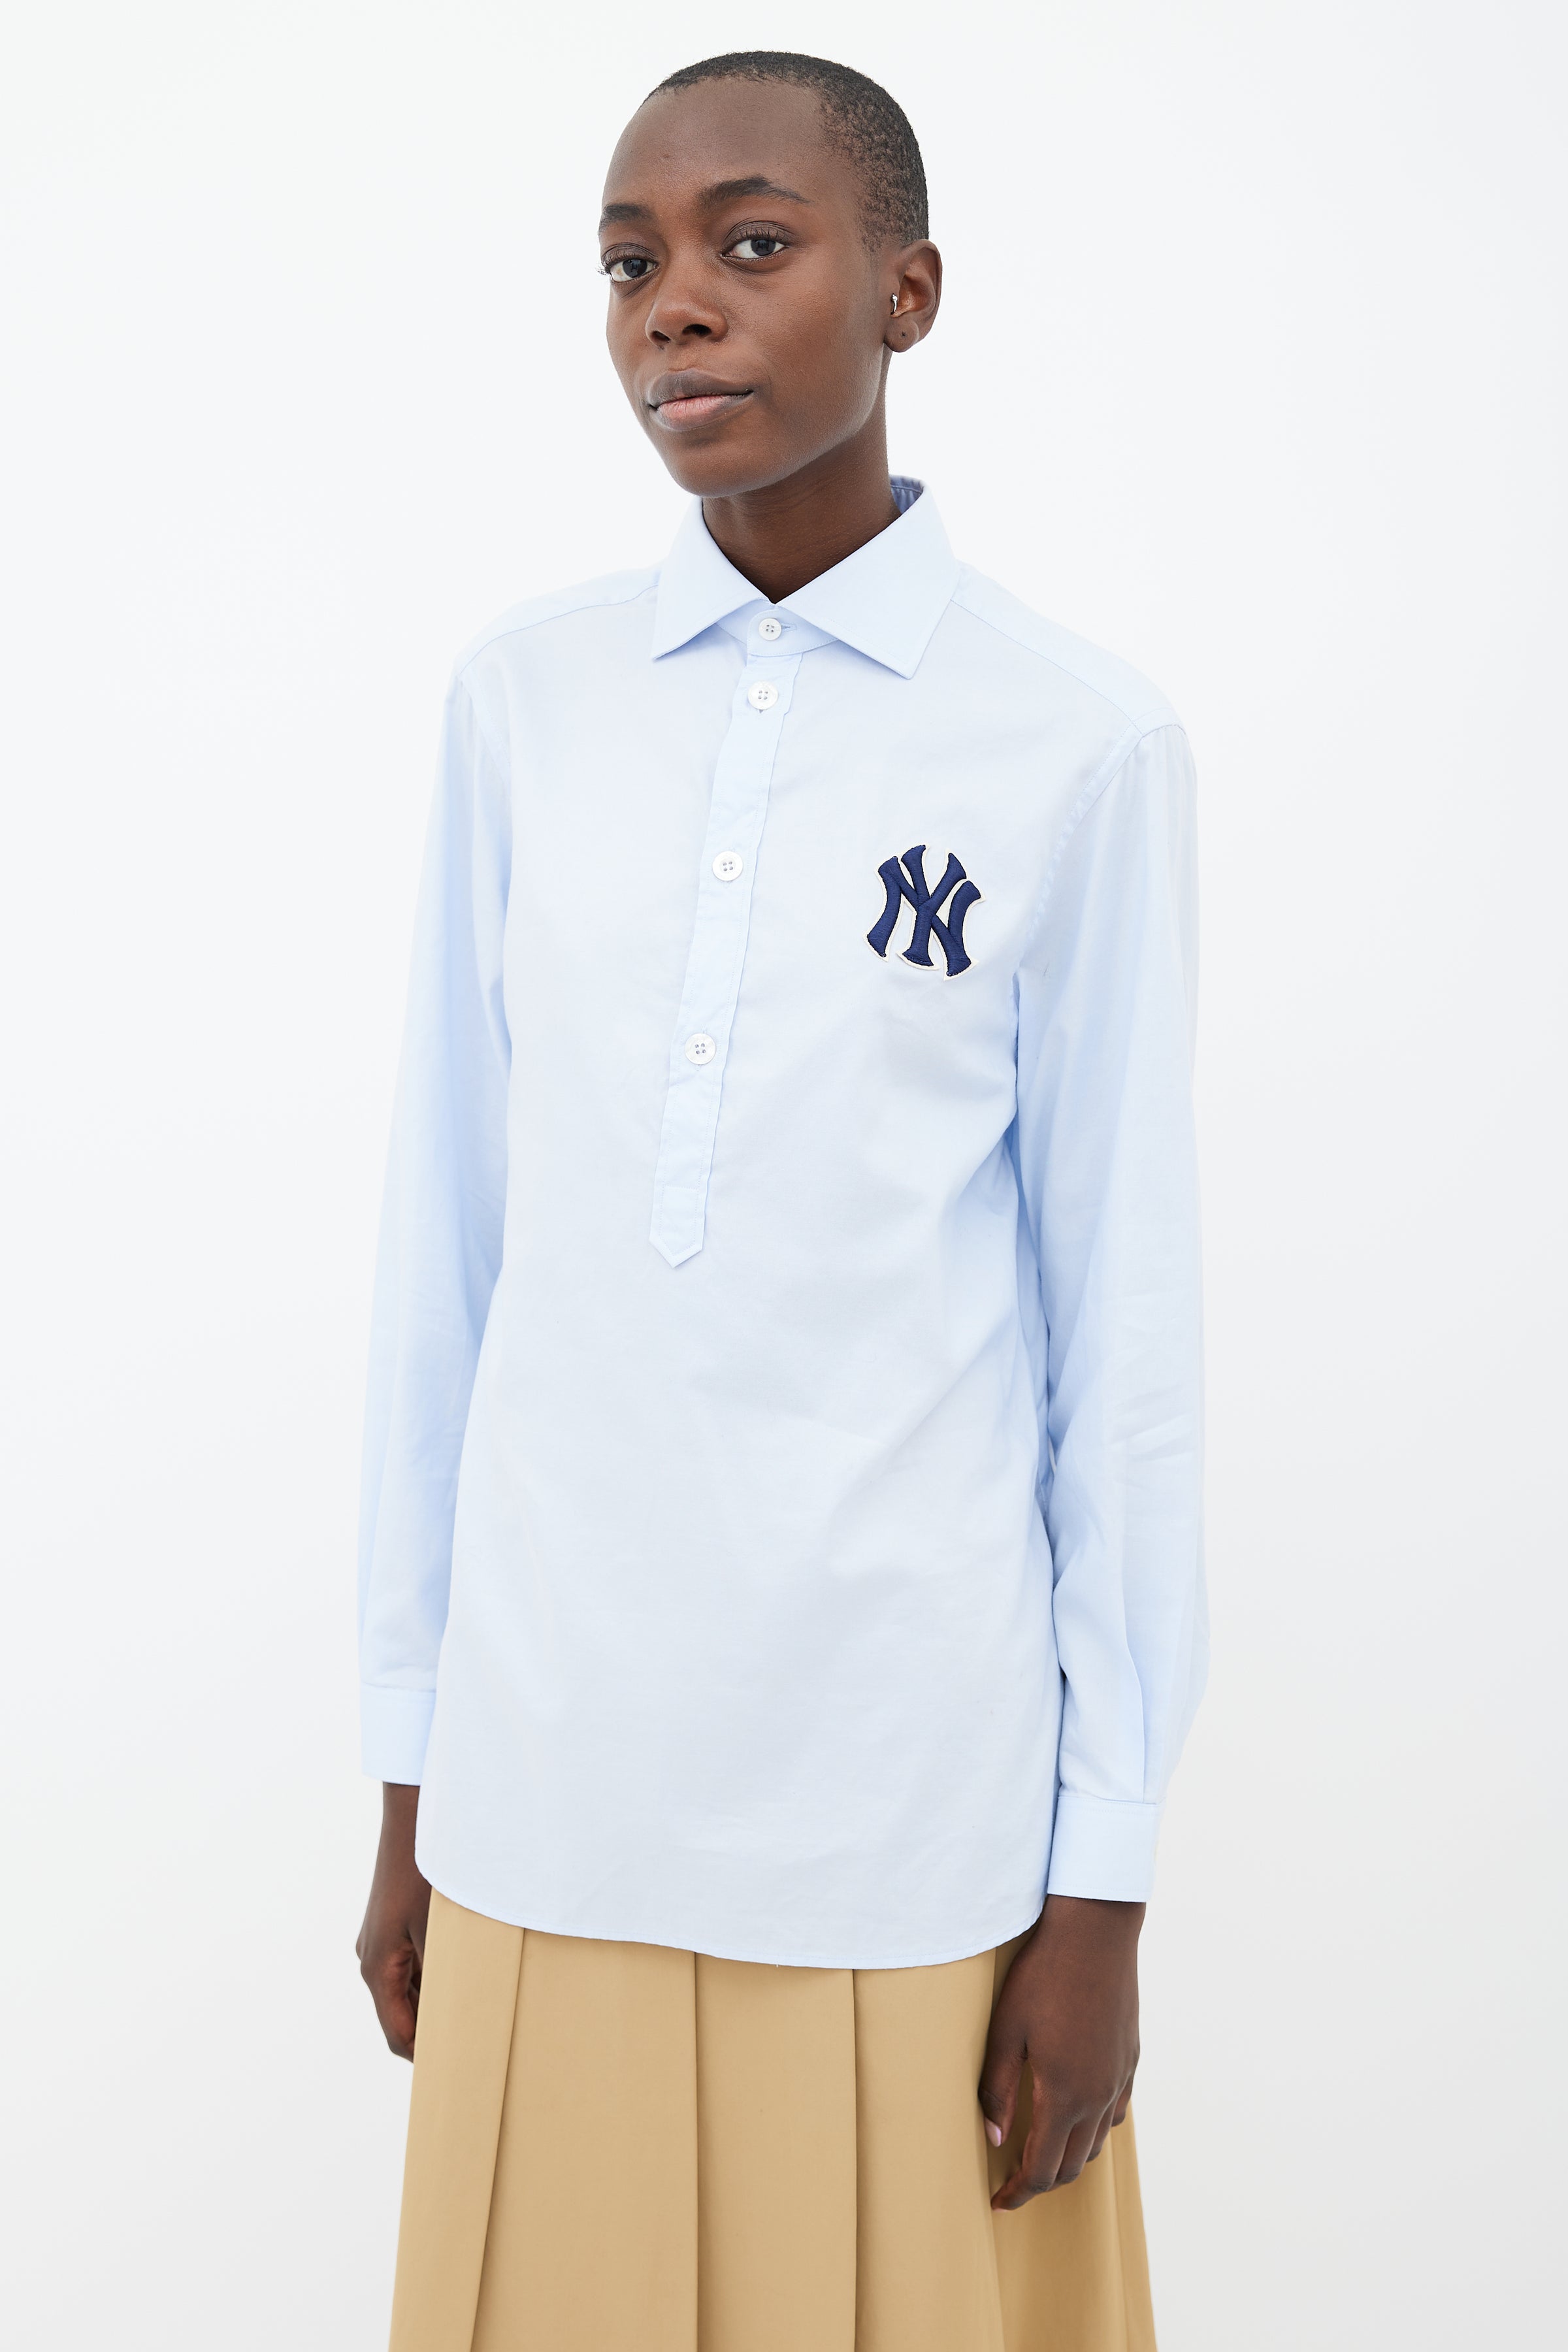 Gucci Men's Polo With Ny Yankees™ Patch In White